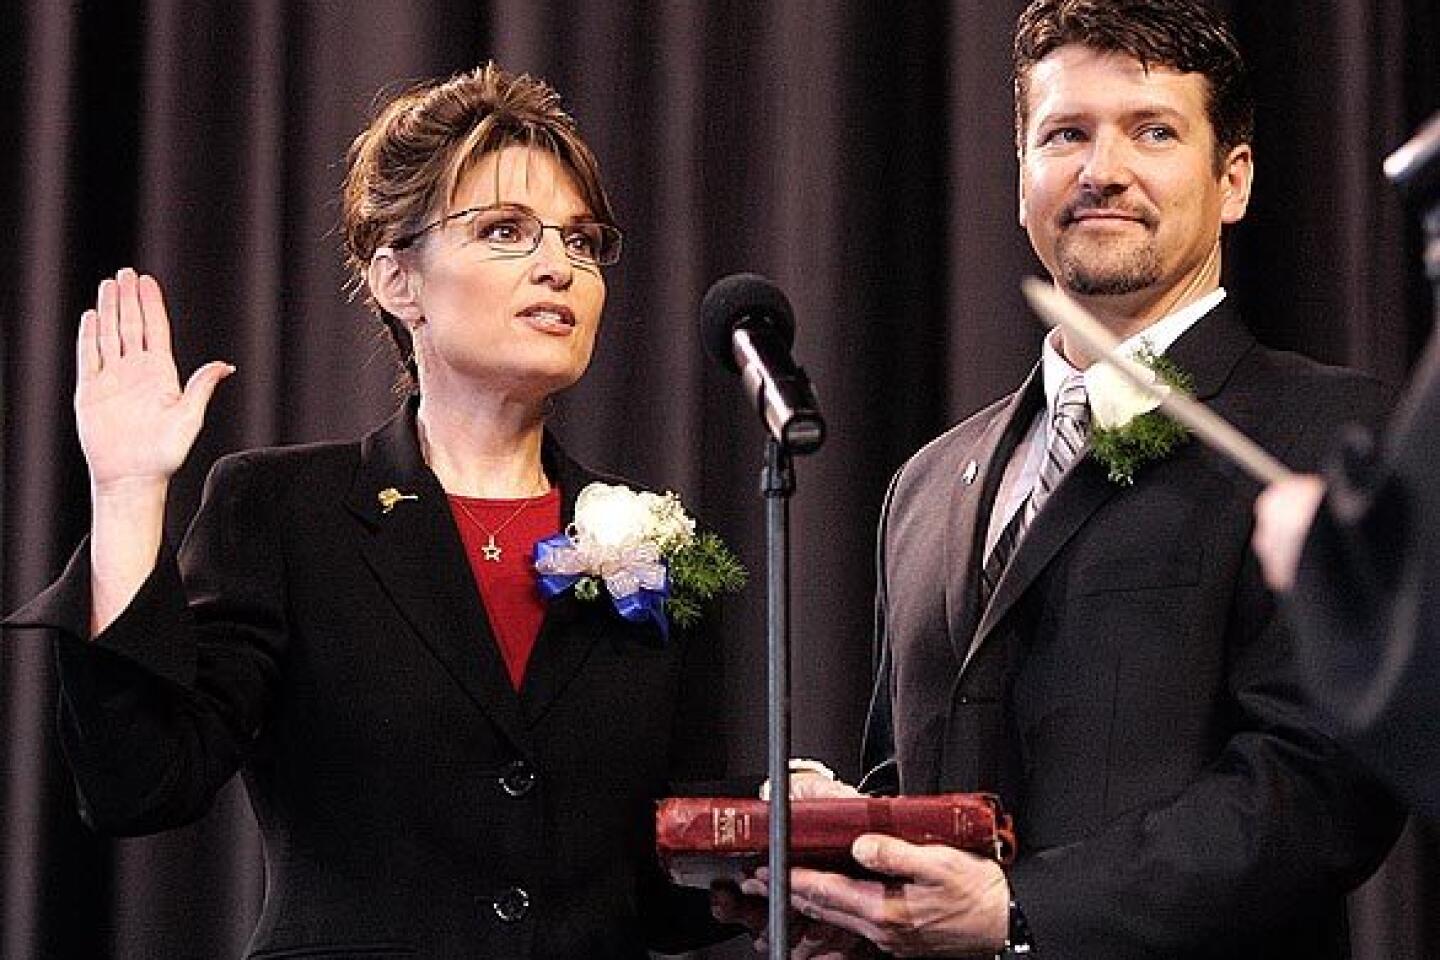 NY Times Palin editorial showed 'arrogance,' her lawyer says